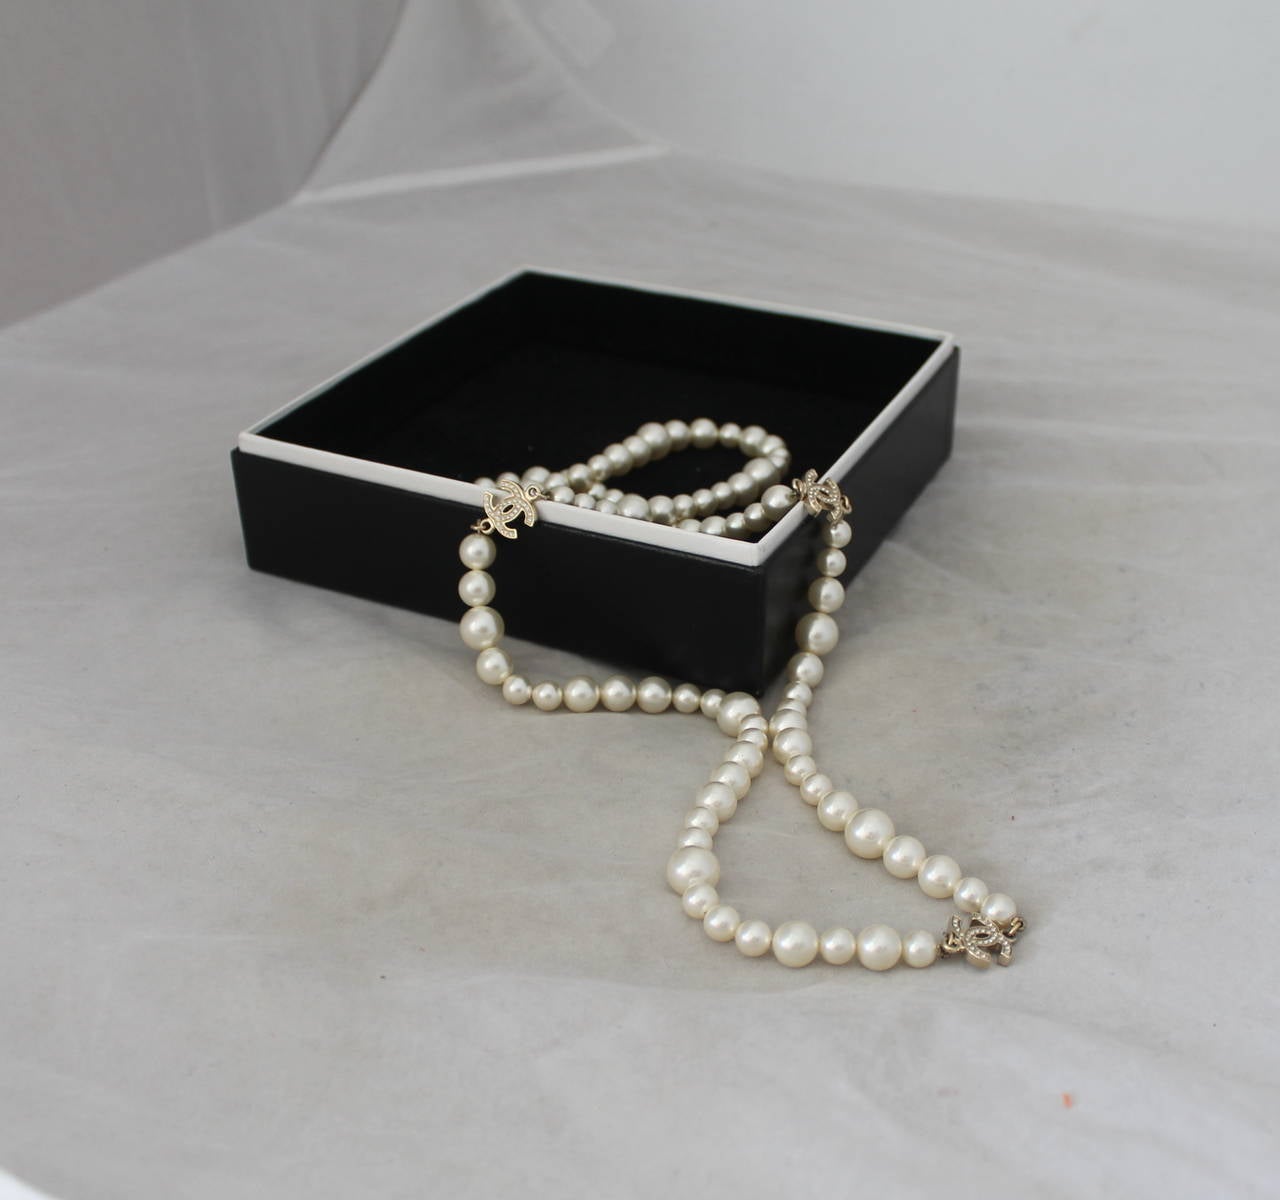 Chanel 2011 Graduated Pearl Necklace with Rhinestone 